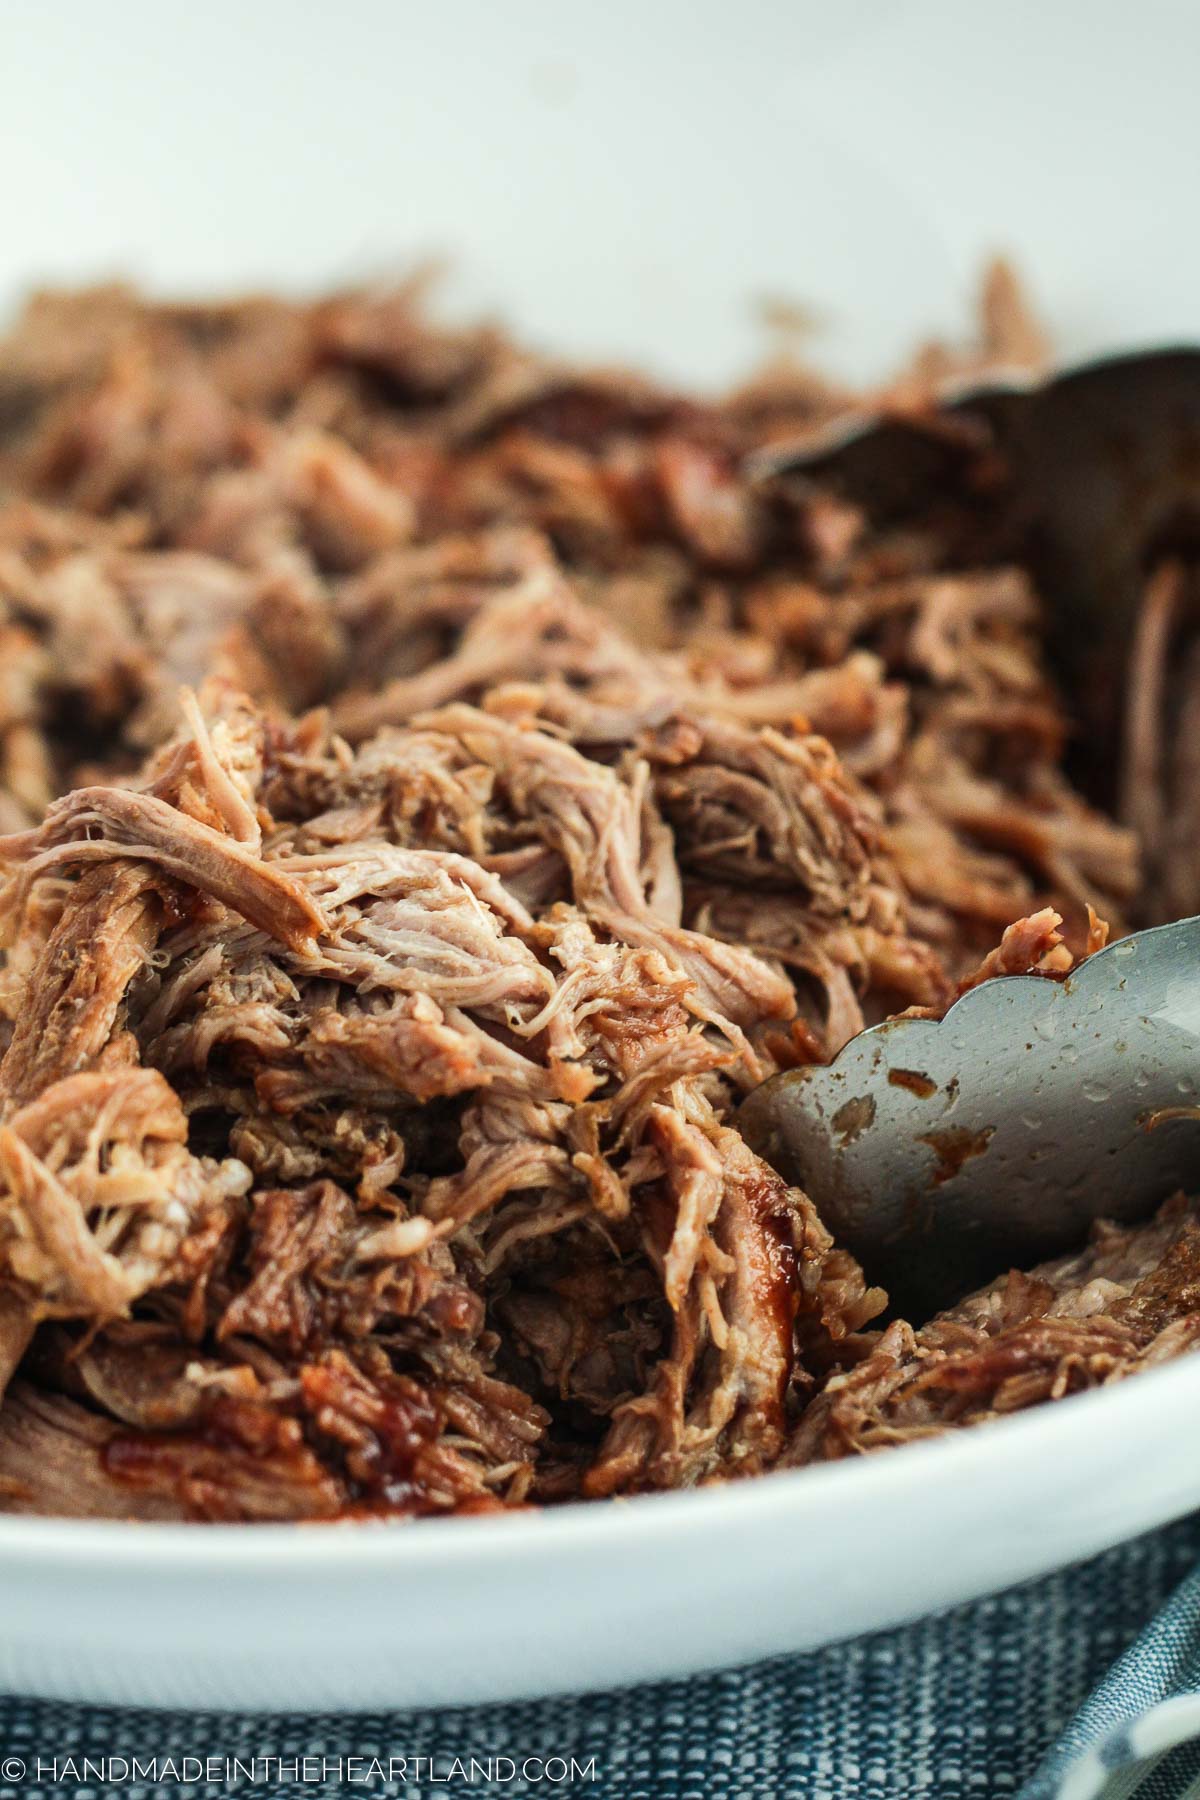 How to Make Instant Pot Pulled Pork Story | Handmade in the Heartland